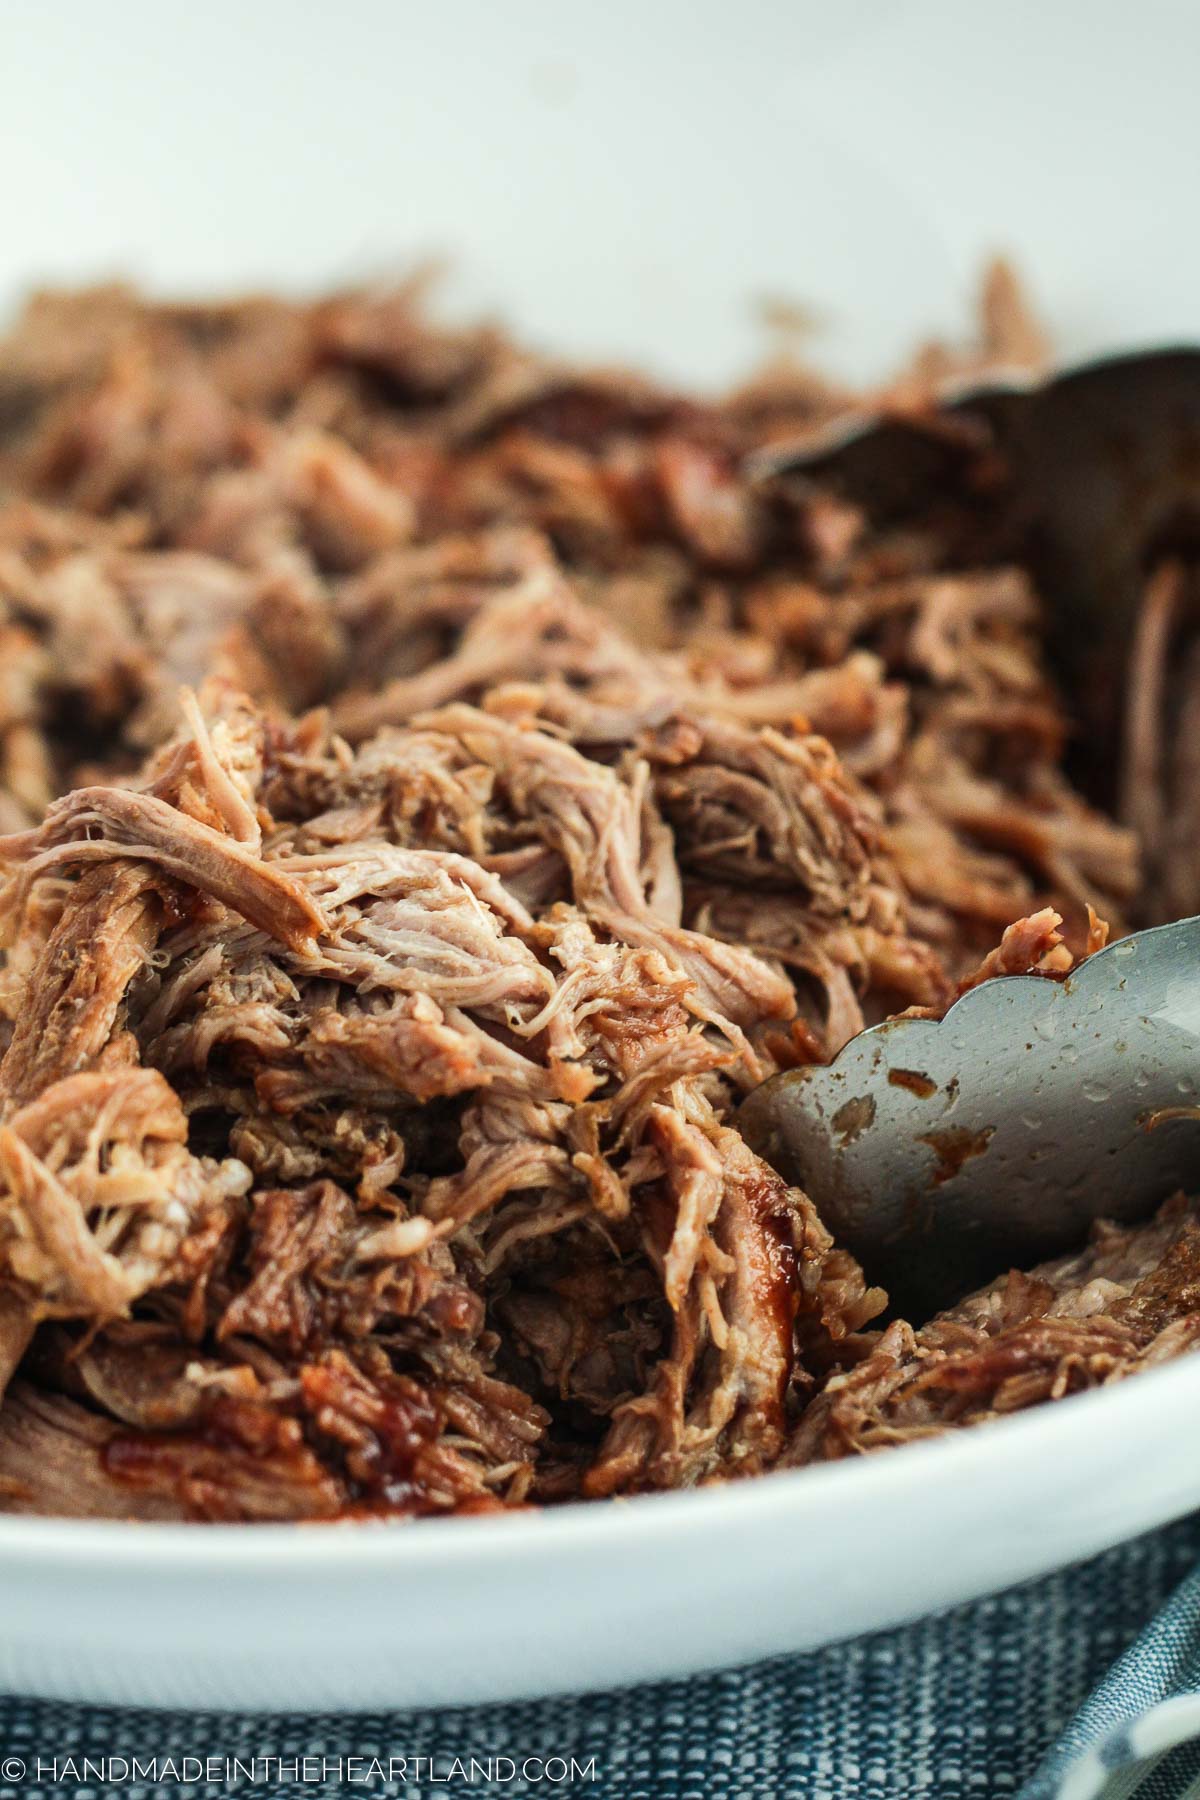 How to Make Instant Pot Pulled Pork Story | Handmade in the Heartland